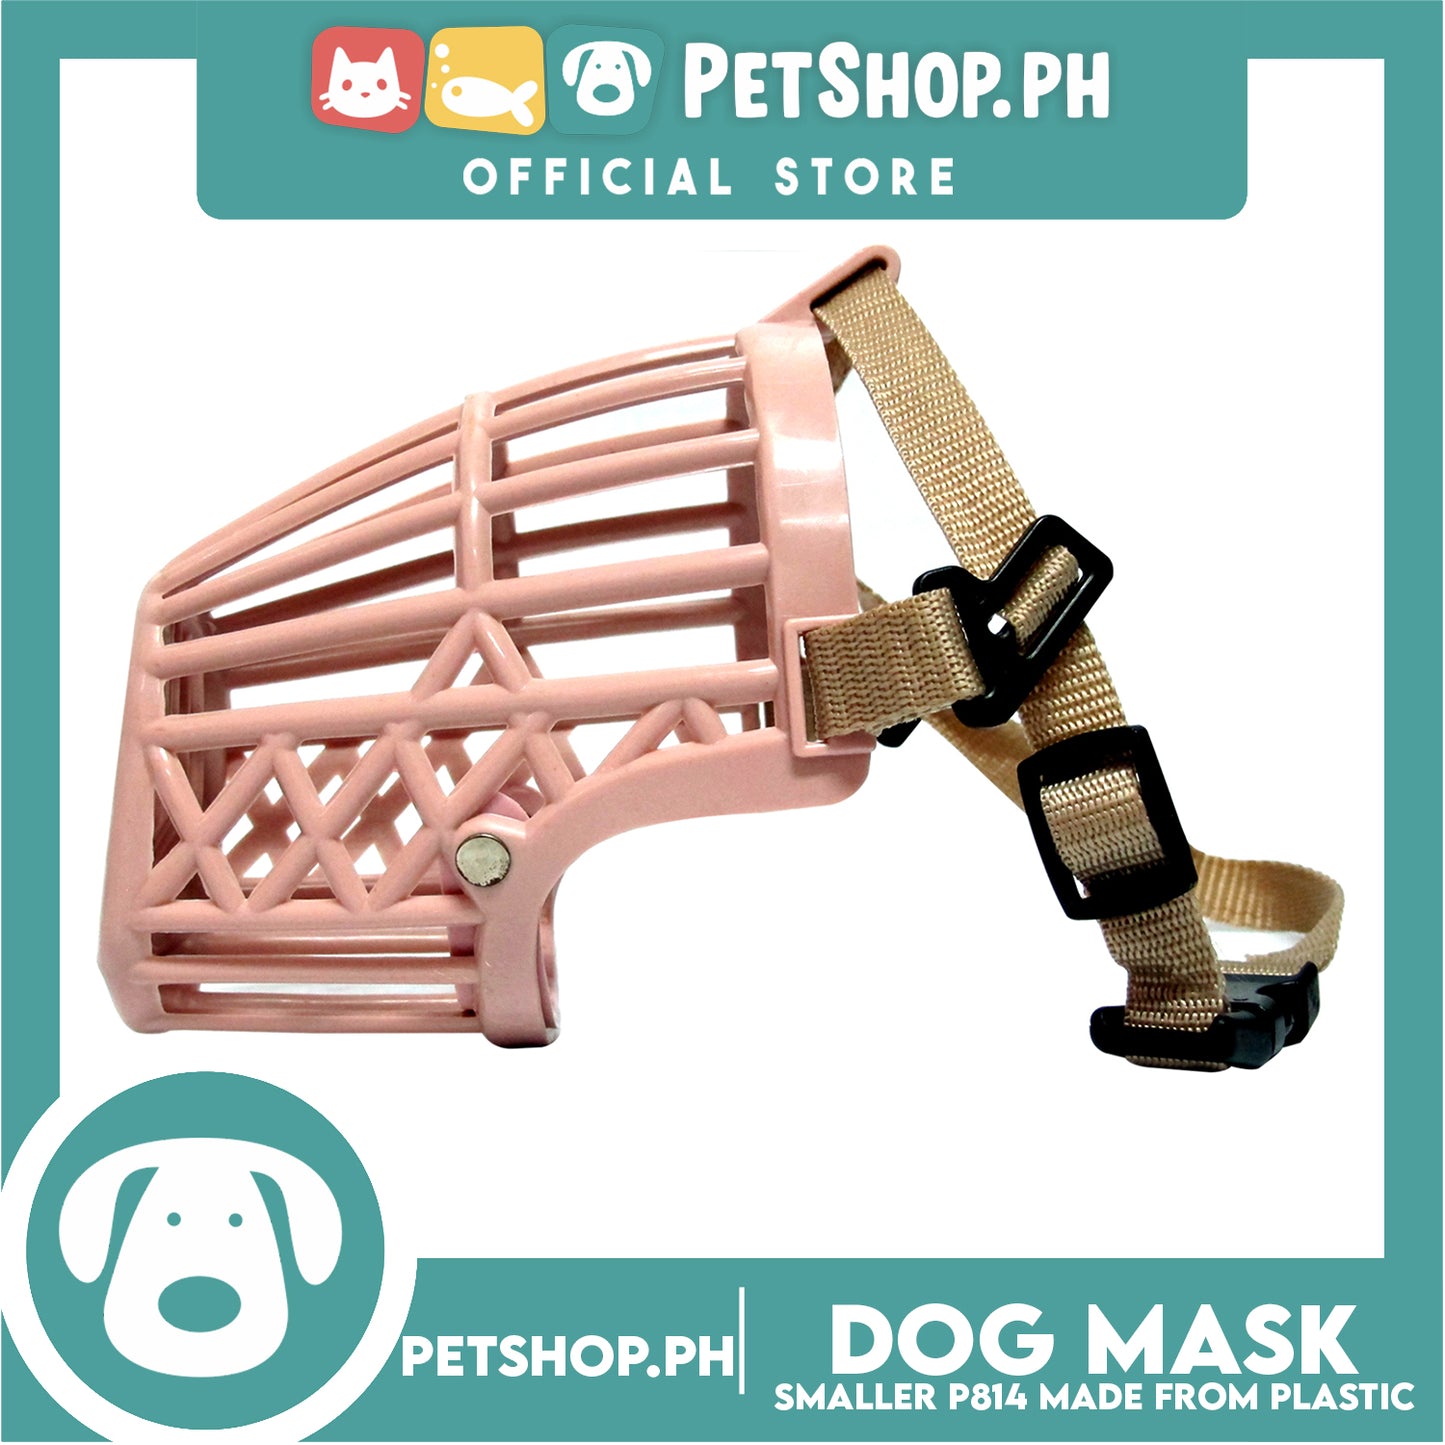 Dog Muzzle Soft Silicone Muzzle Adjustable Mask #1 P814 (XS) for Small Dogs, Puppies